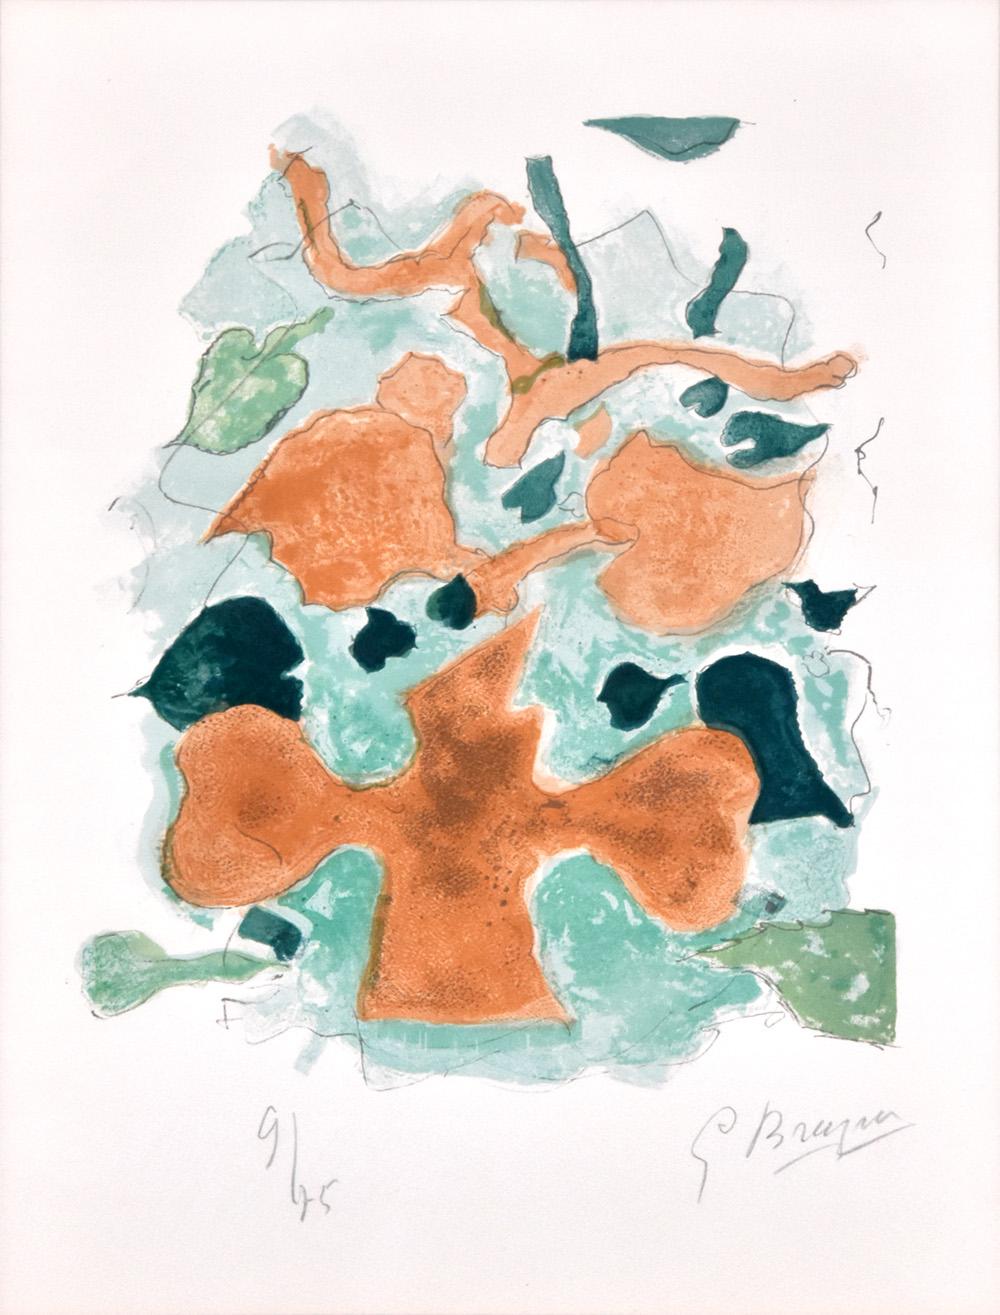 Georges Braque Figurative Print - La Forêt (The Forest) from Lettera amorosa, 1963